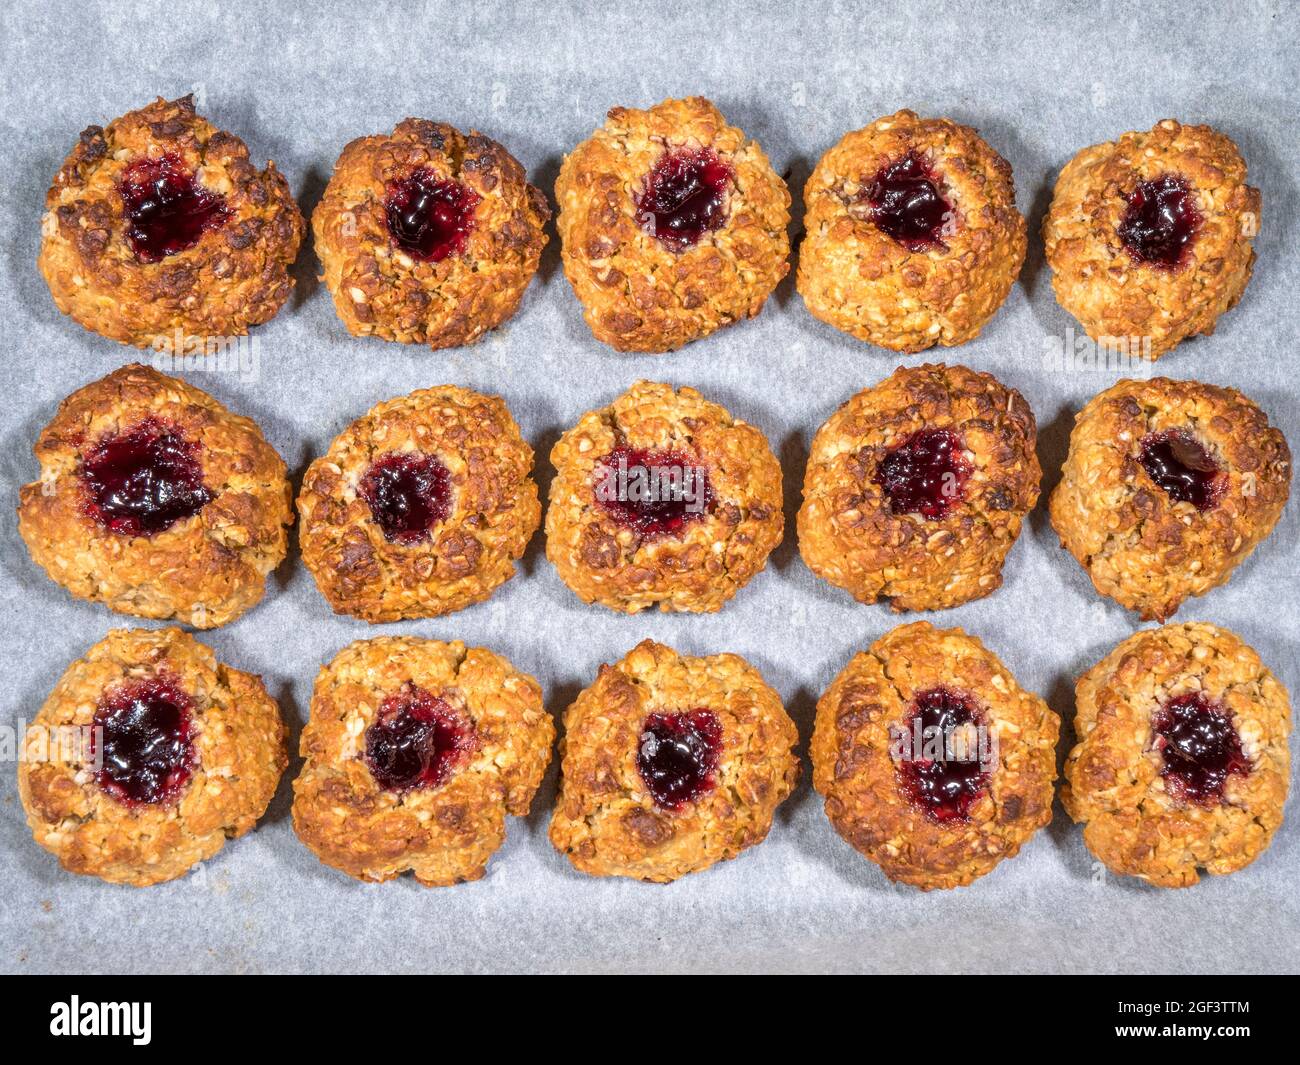 Closeup POV overhead shot of gluten free, peanut butter and jam oat cookies in rows on greaseproof paper. Stock Photo